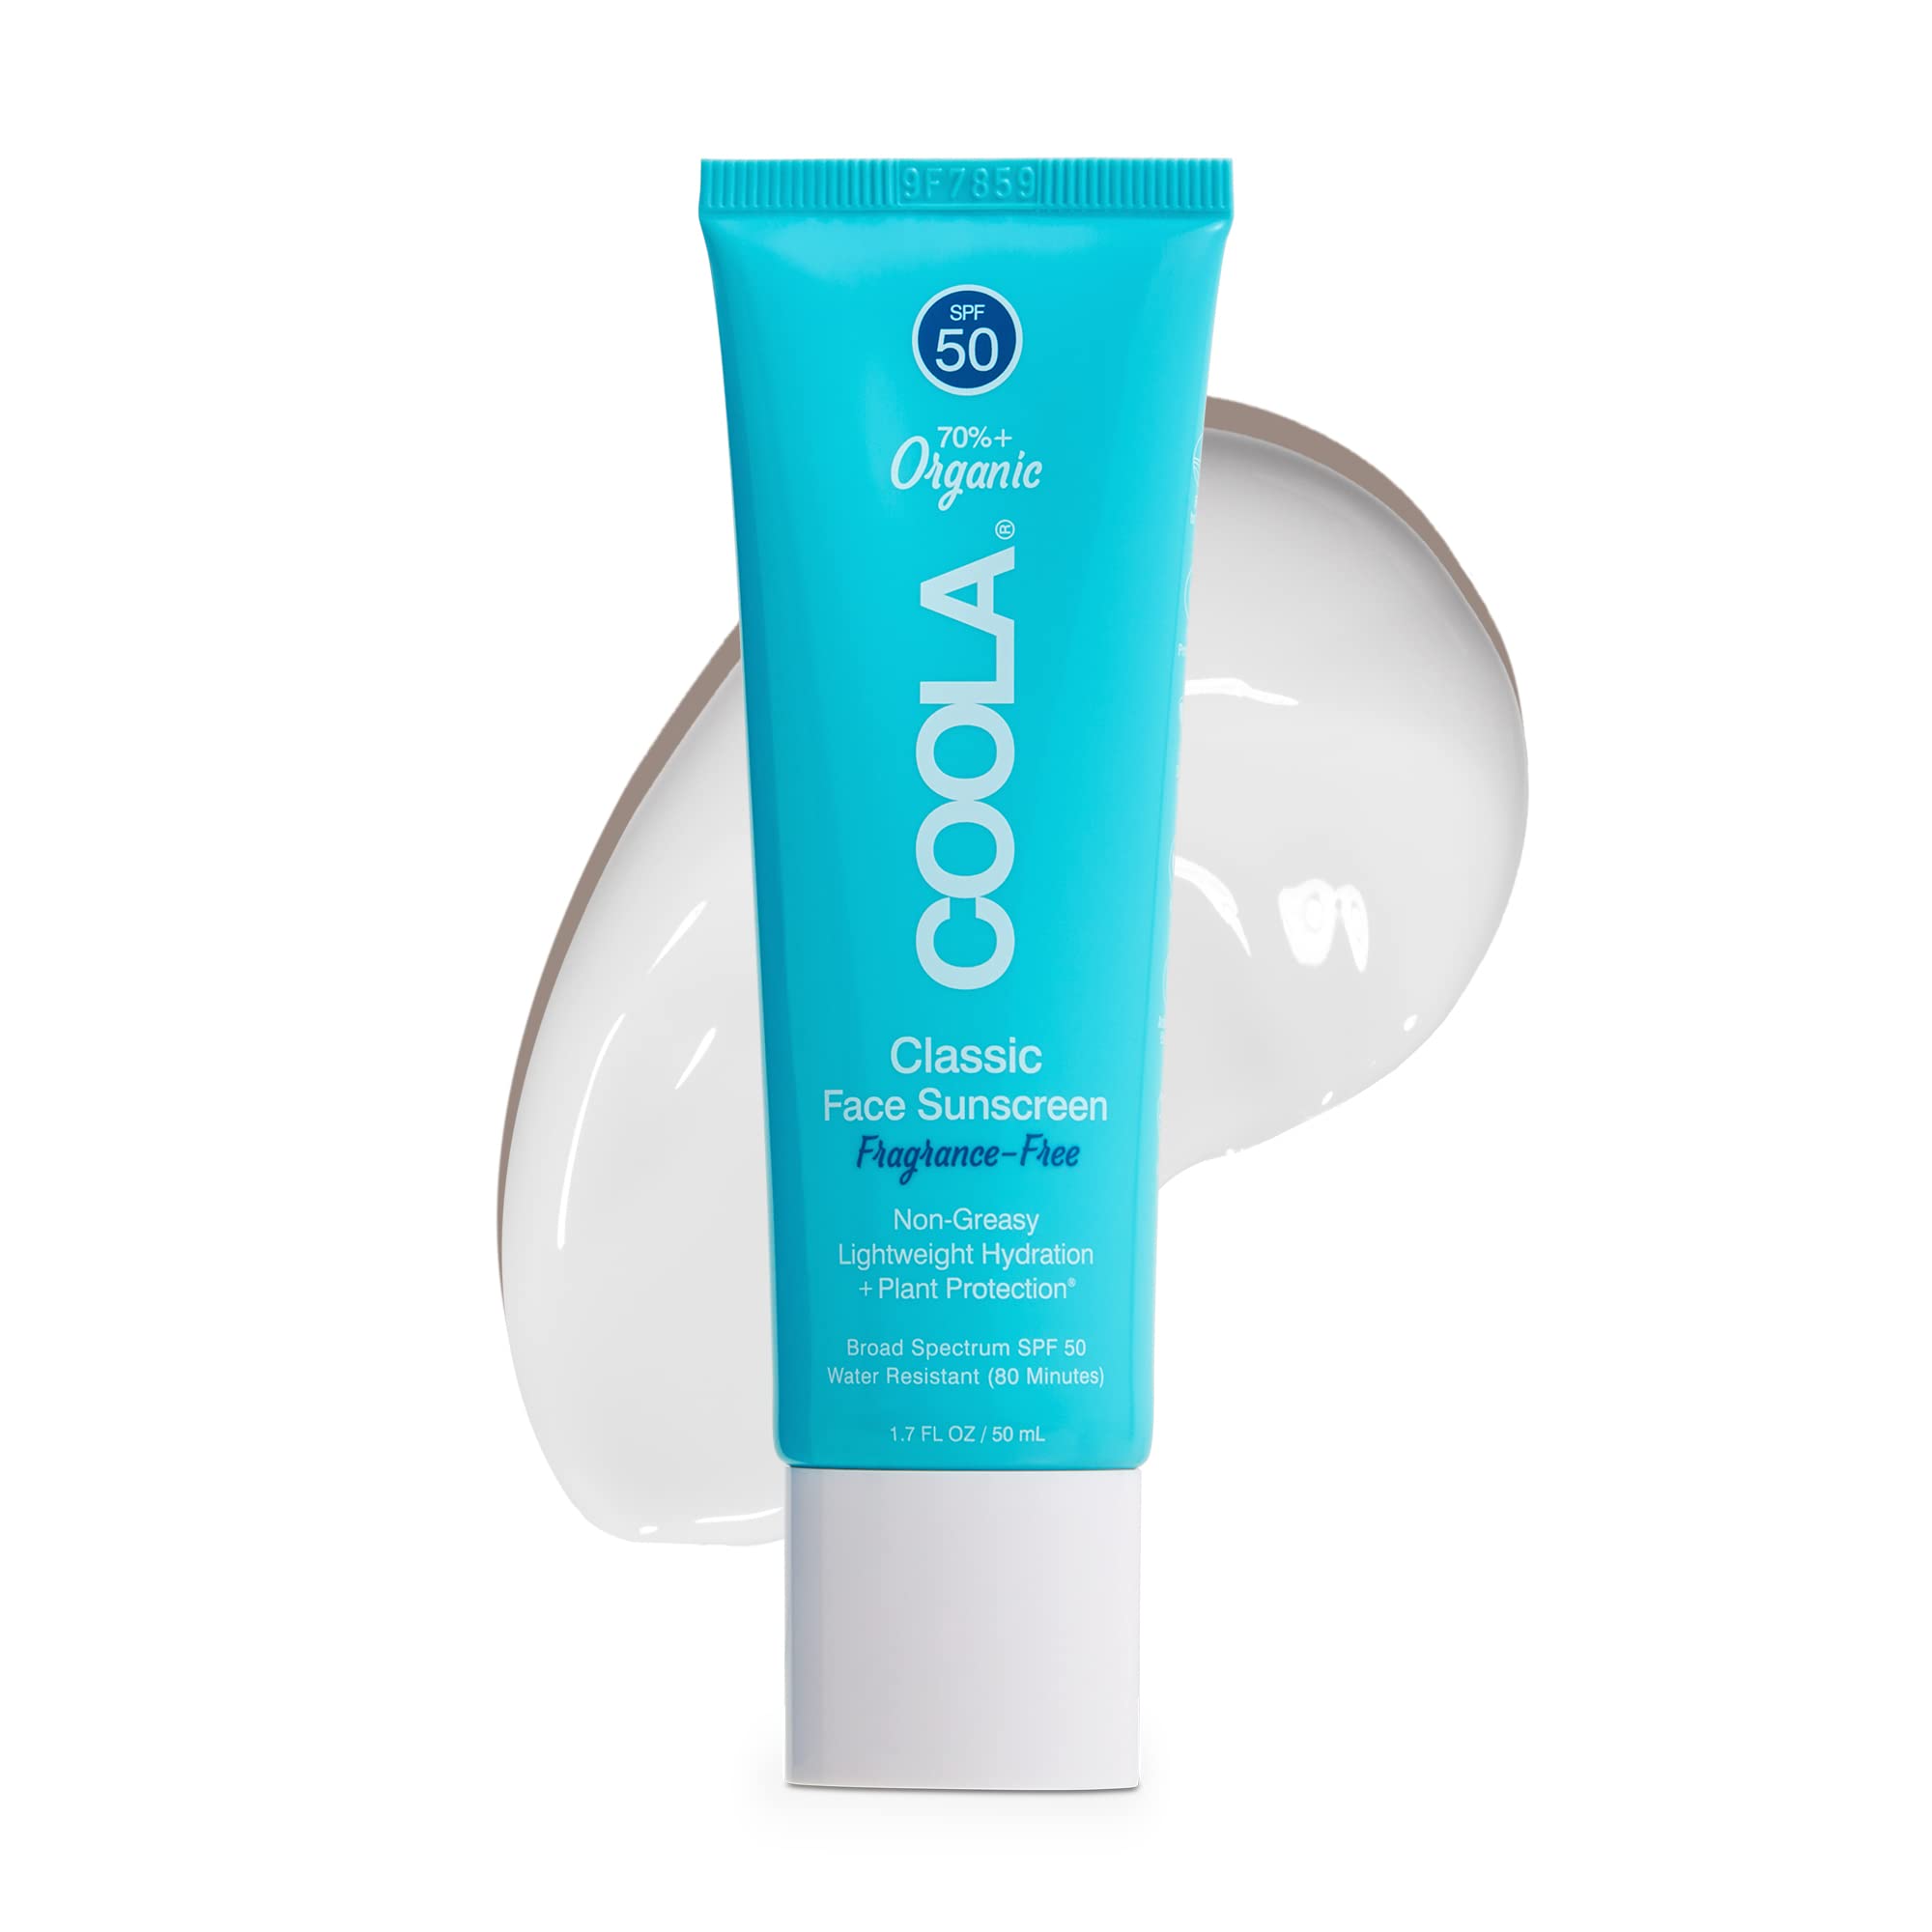 Coola COOLA Organic Face Sunscreen SPF 50 Sunblock Lotion, Dermatologist Tested Skin Care for Daily Protection, Vegan and Gluten Free